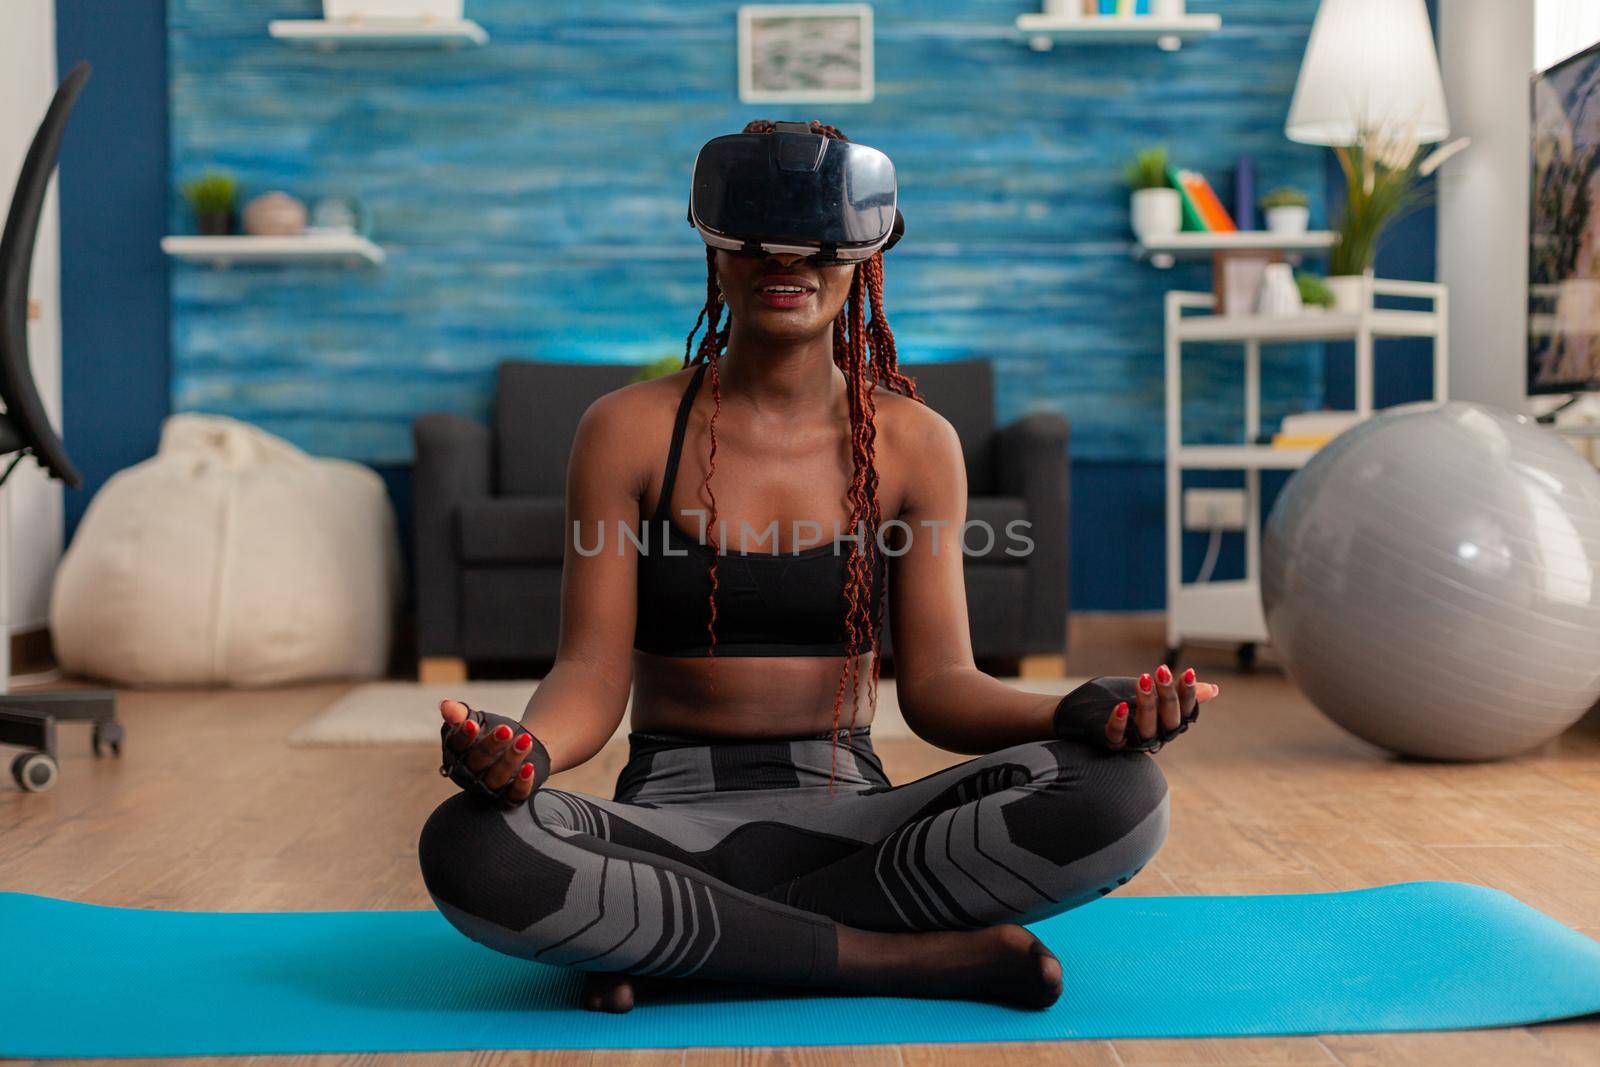 Black woman experiencing virtual reality training body and mind meditating in lotus pose sitting on yoga mat in home living room for calm, healthy harmony lifestyle dressed in sportwear.